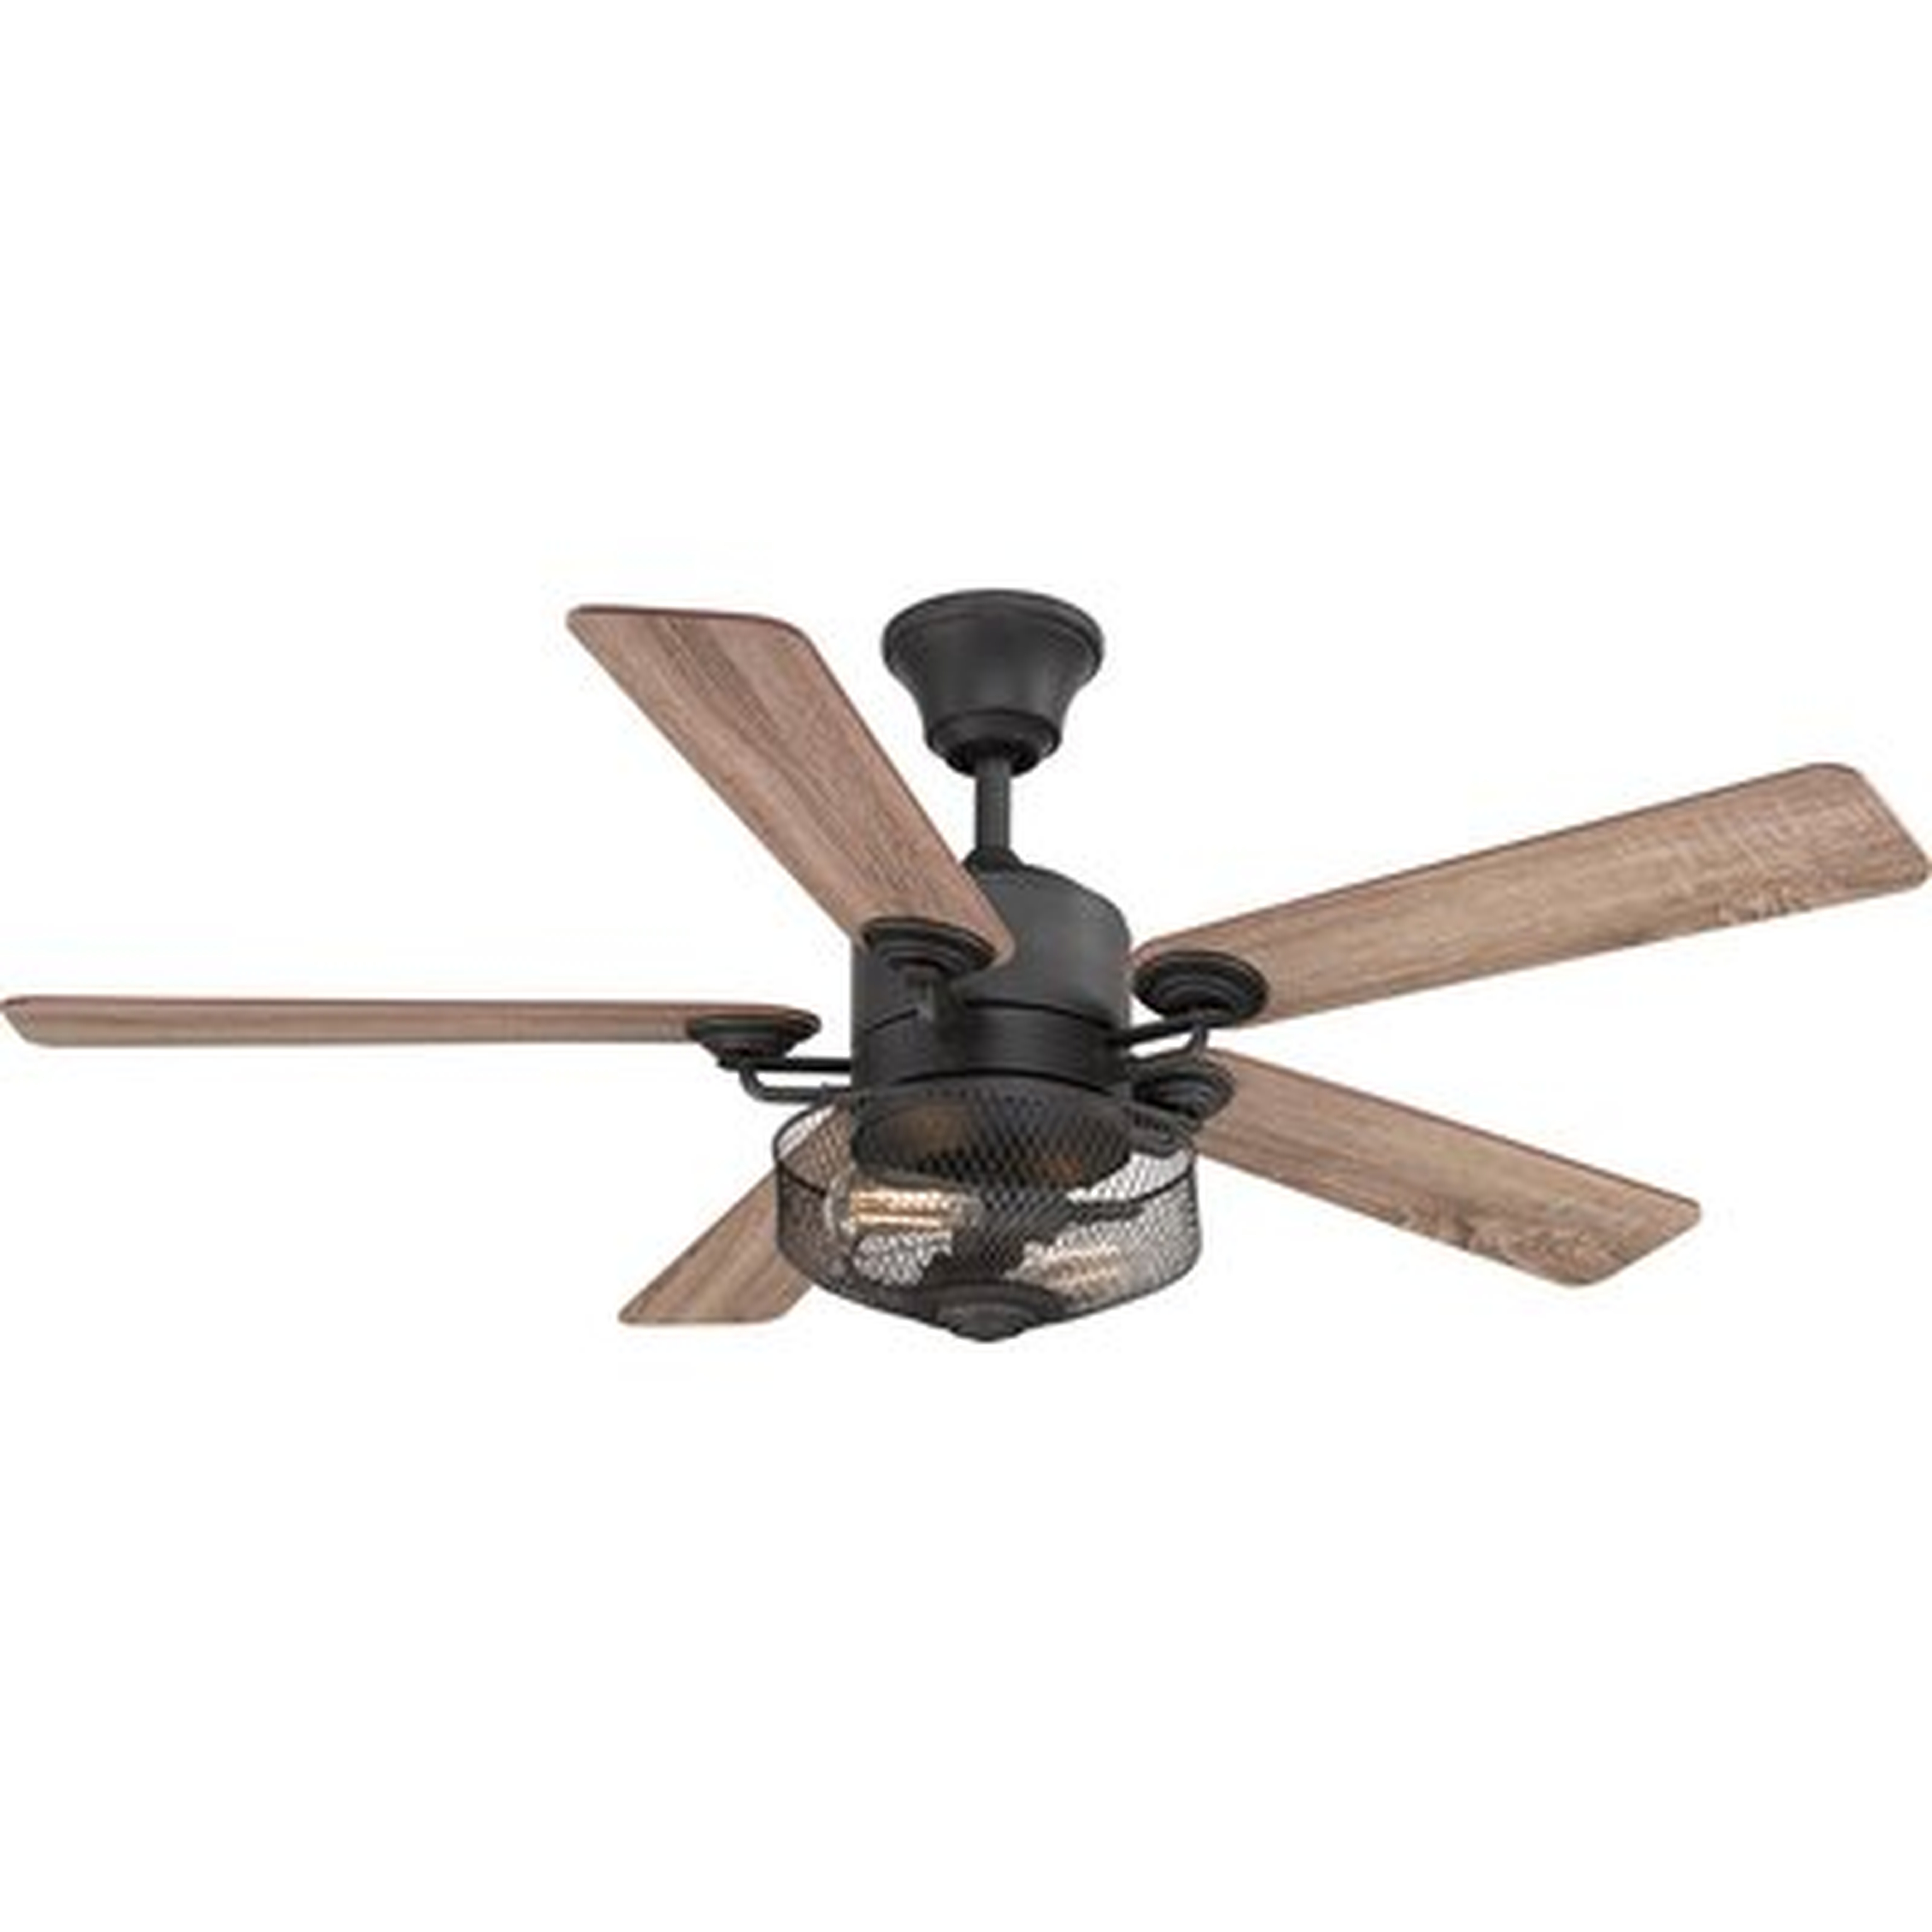 54" Clauson 5 - Blade Standard Ceiling Fan with Remote Control and Light Kit Included - Birch Lane